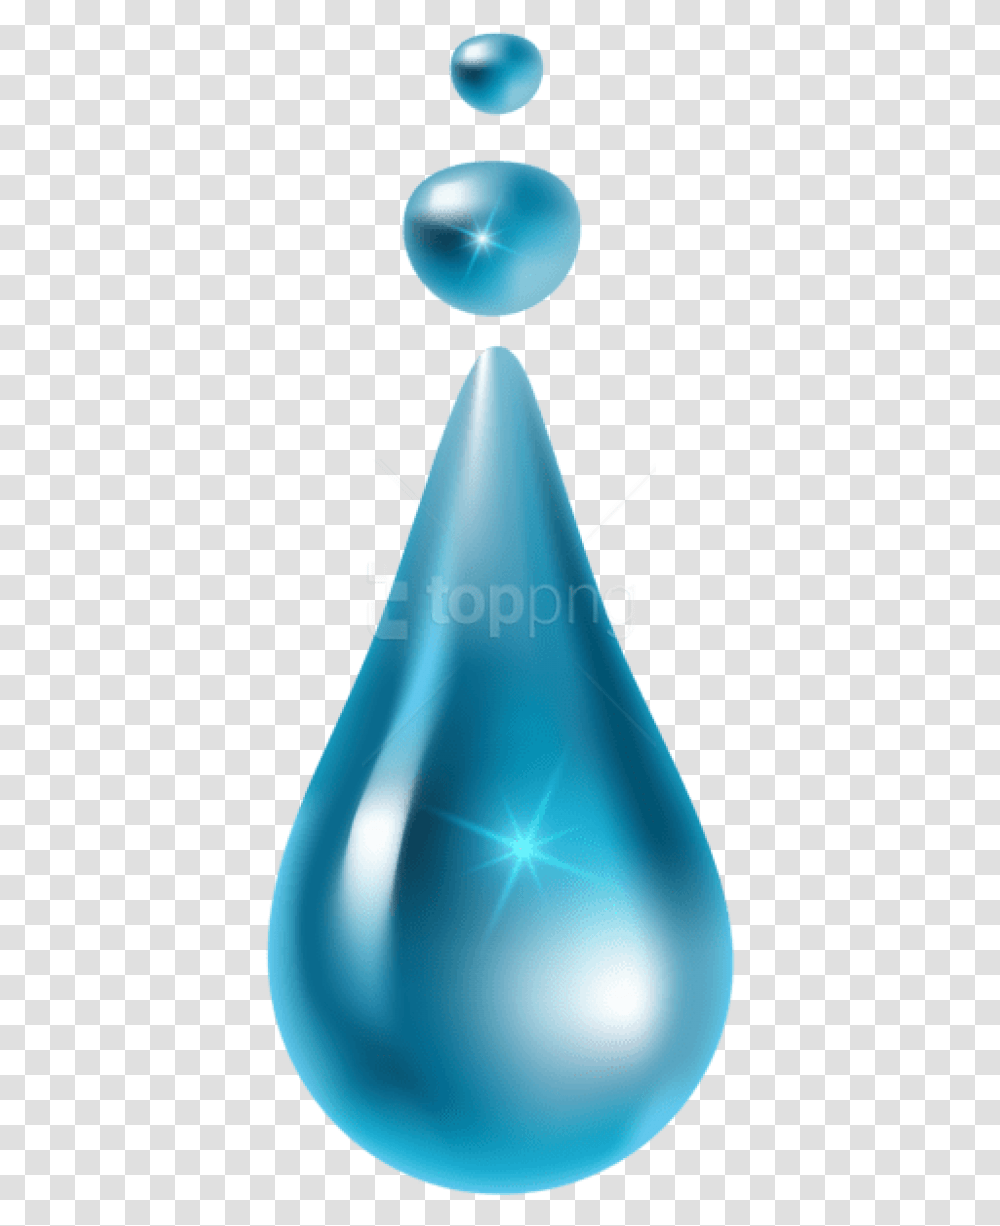 Free Water Drop Clipart Photo Water Drop Image, Apparel, Party Hat Transparent Png